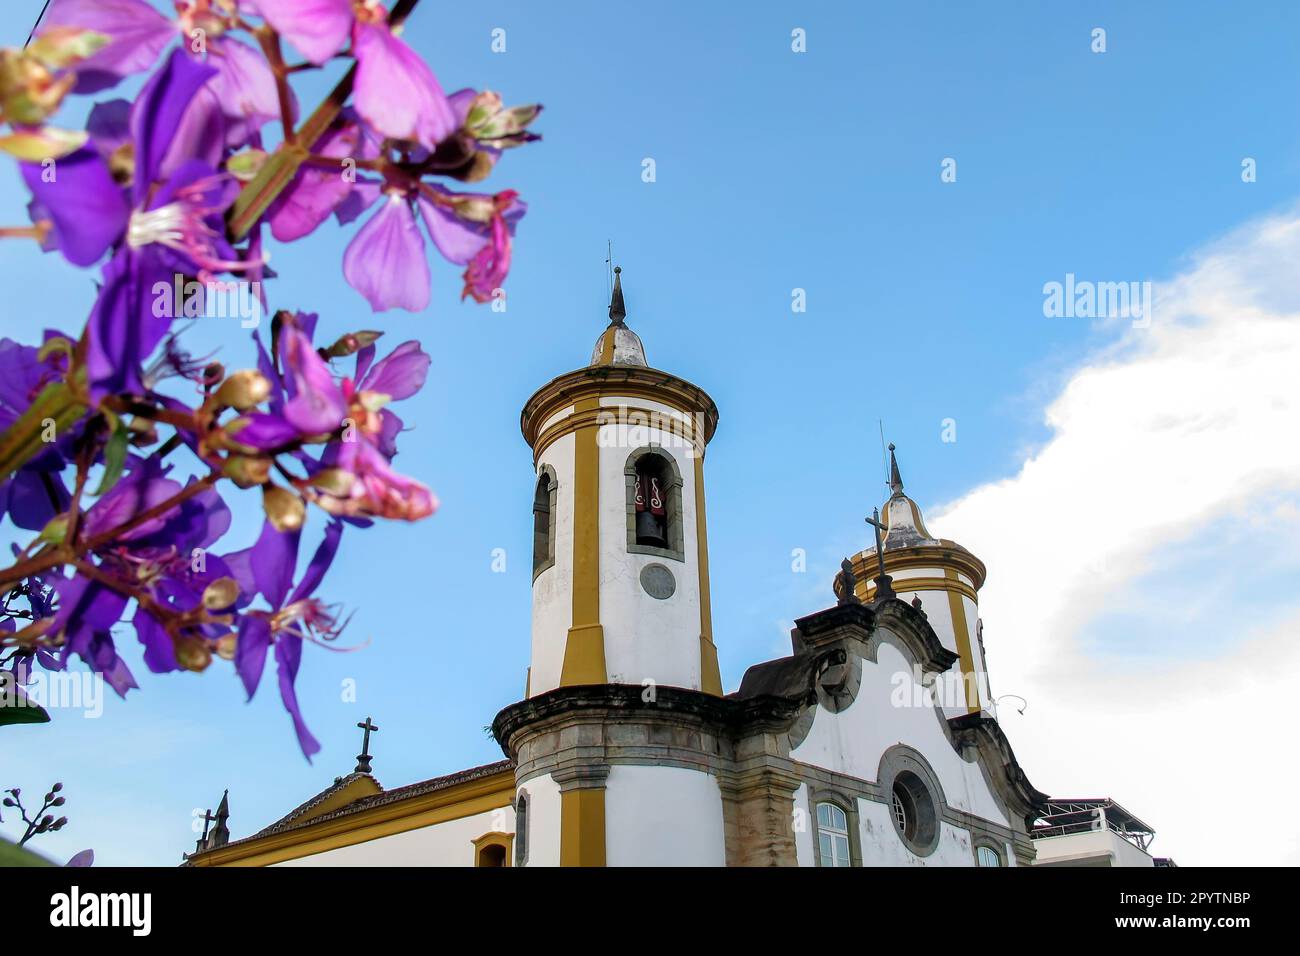 Oliveira, Minas Gerais, Brazil - February 24, 2023: detail of the church tower our lady of Oliveira, in the city of Oliveira, Minas Gerais Stock Photo